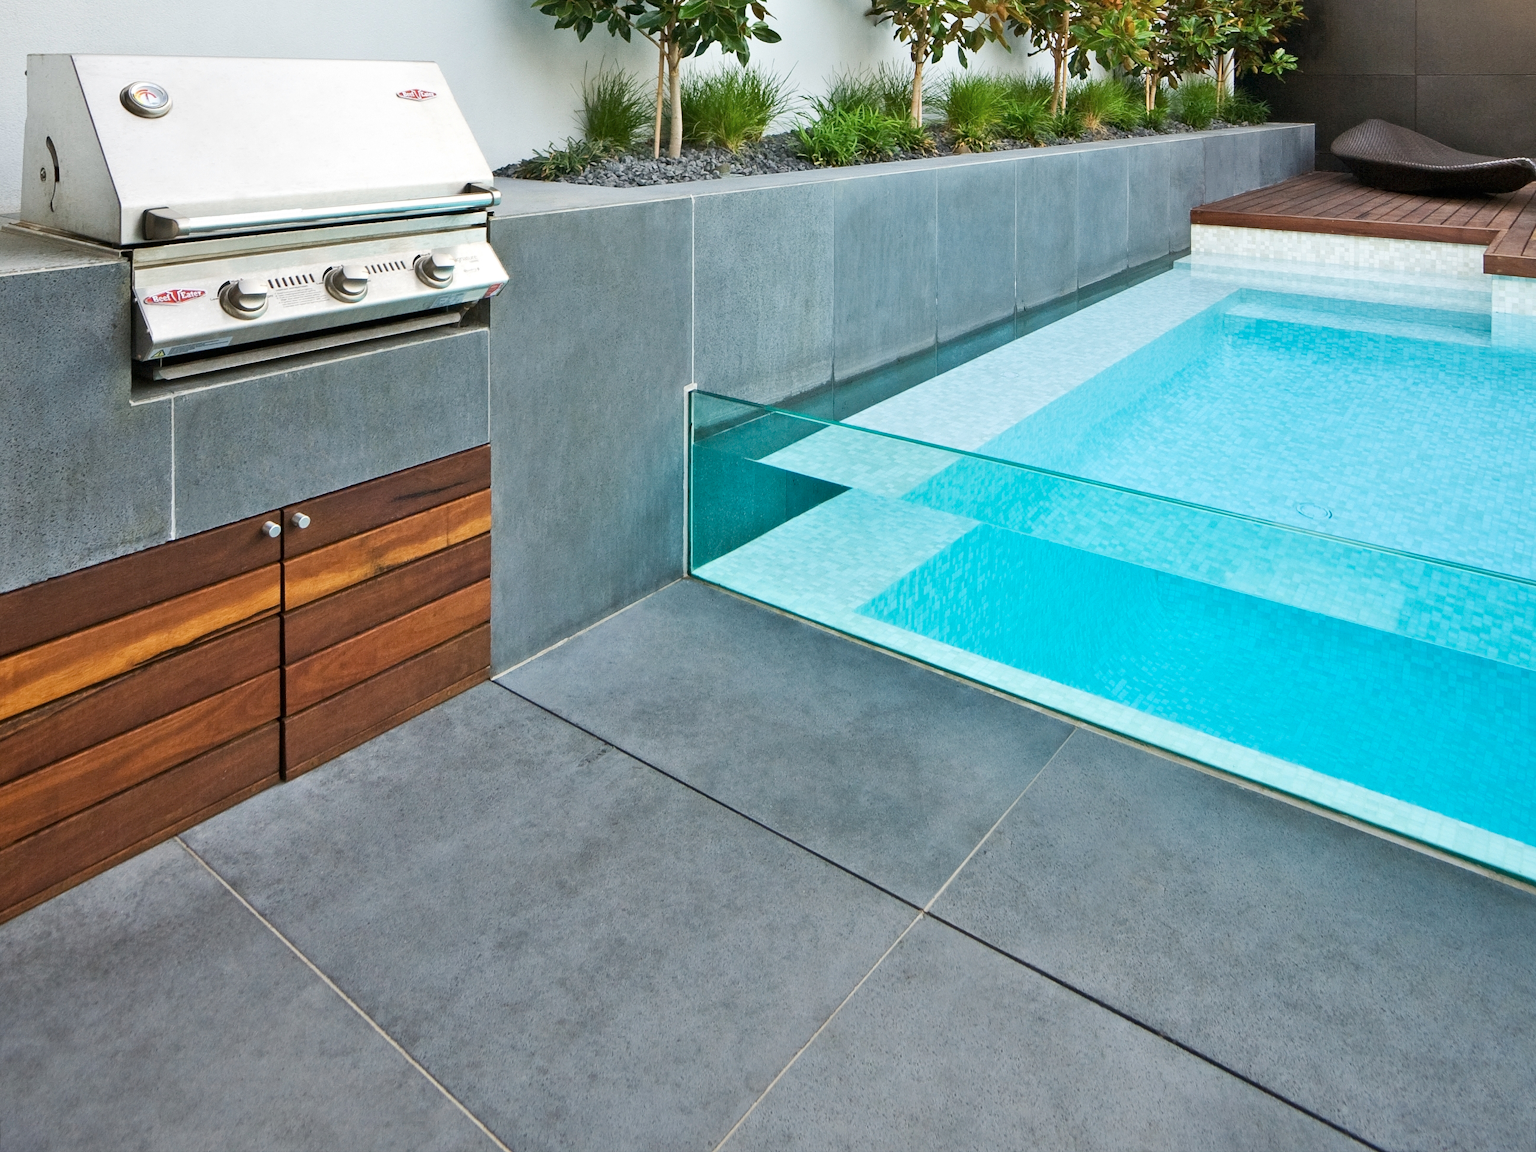 View of large format bluestone pavers used as flooring and walling in pool area